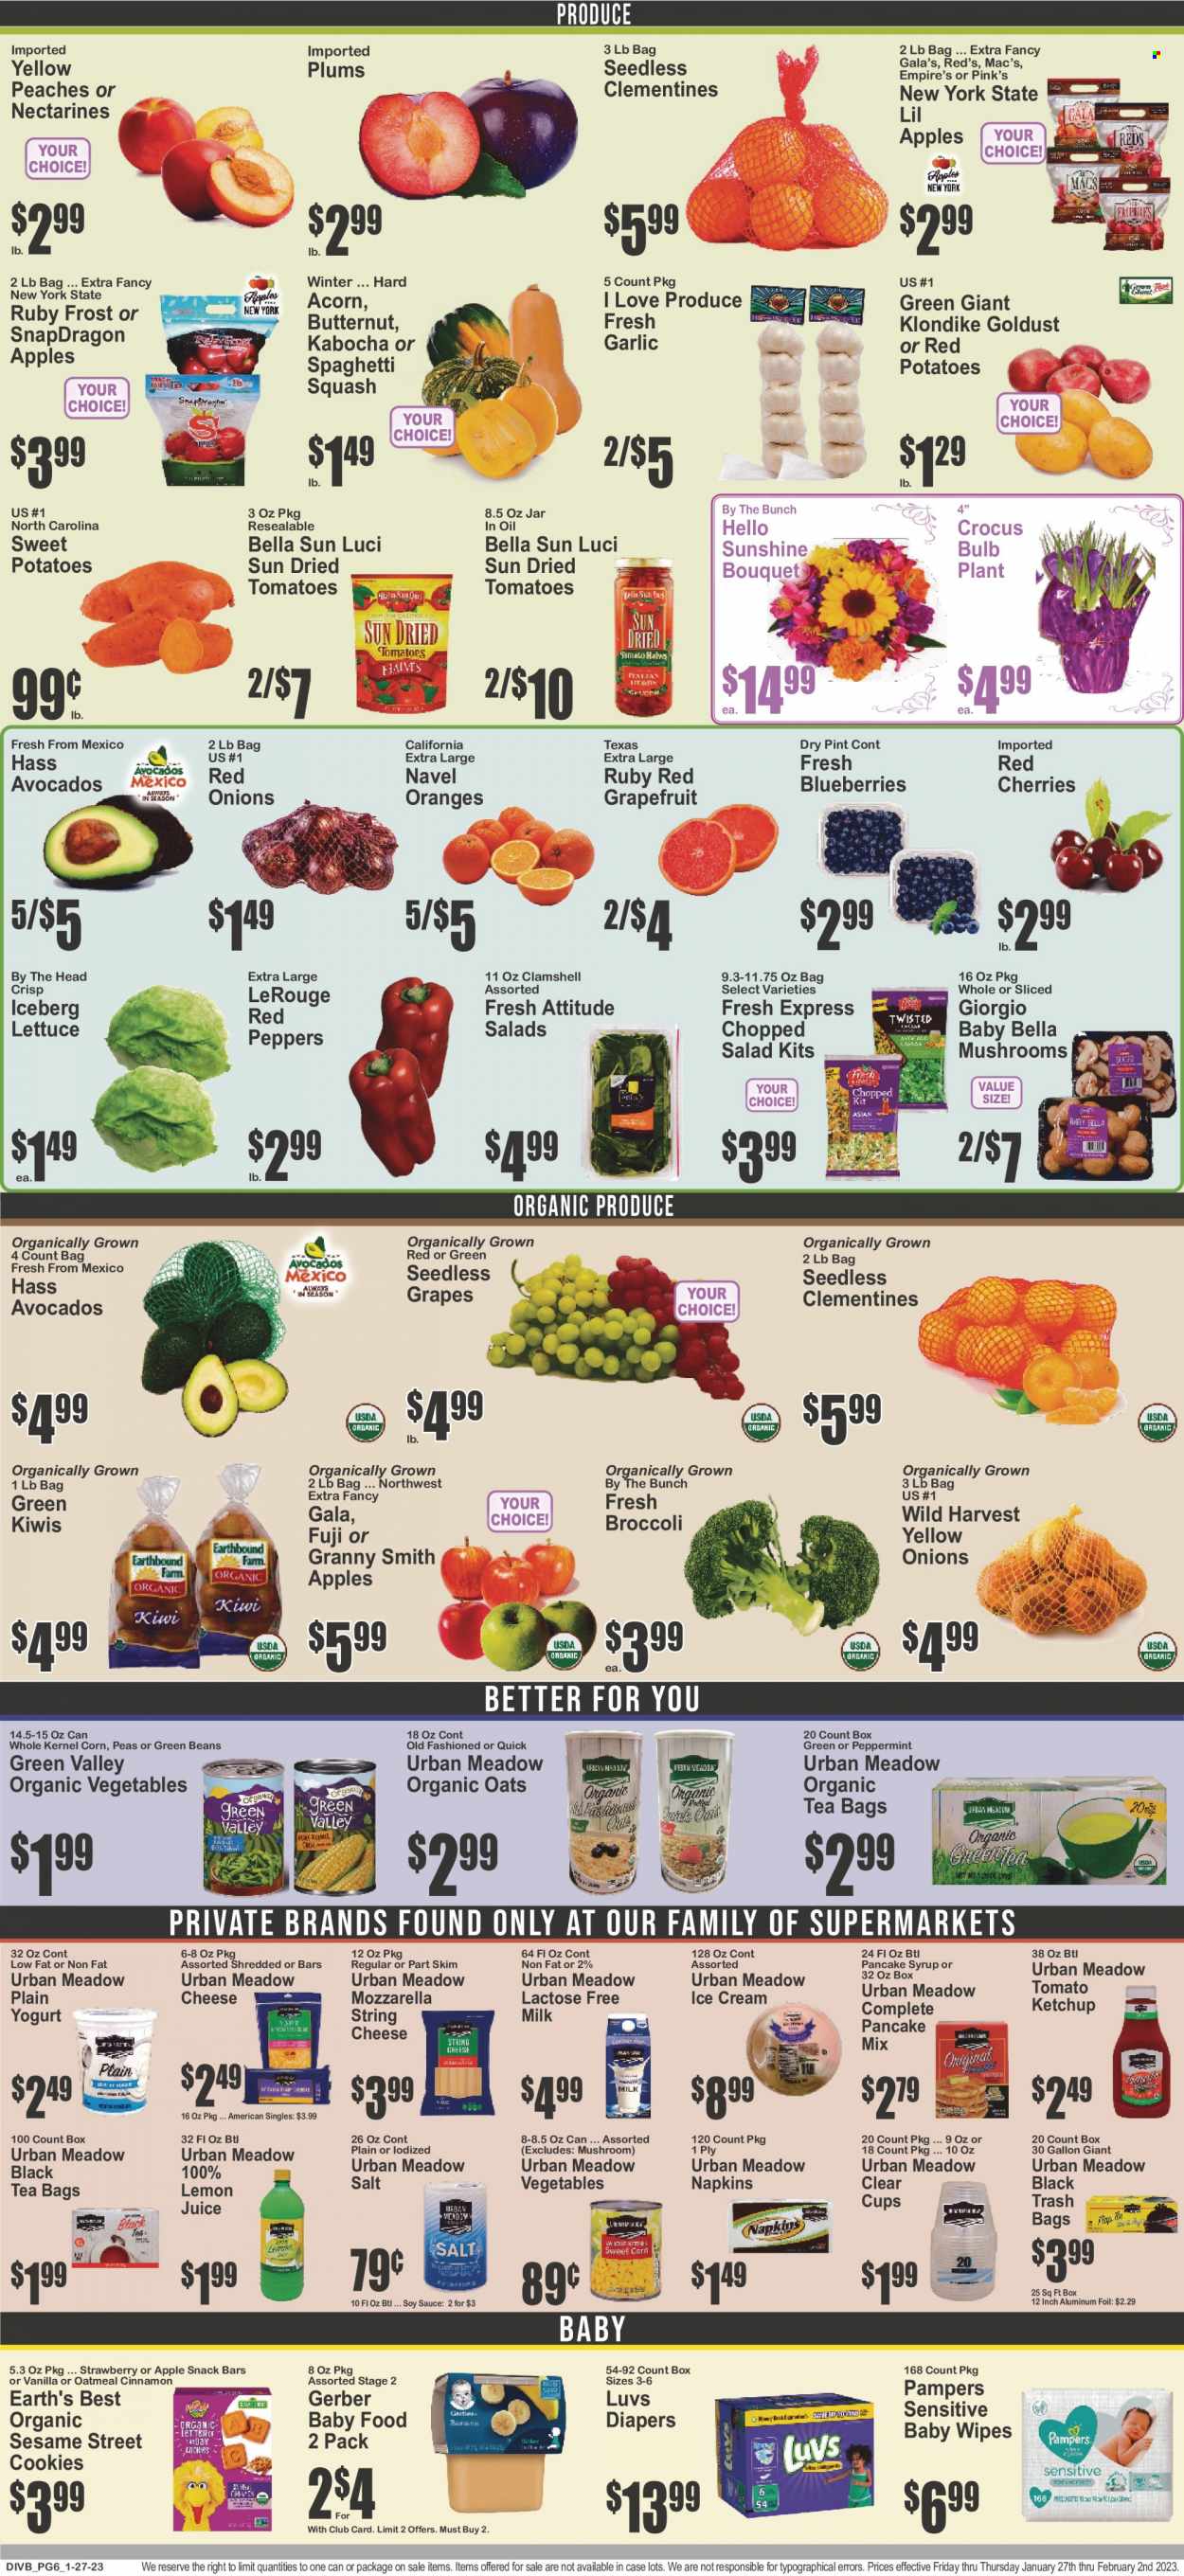 thumbnail - Super Fresh Flyer - 01/27/2023 - 02/02/2023 - Sales products - mushrooms, beans, broccoli, corn, garlic, green beans, red onions, potatoes, pumpkin, peas, onion, lettuce, salad, peppers, Wild Harvest, red potatoes, chopped salad, red peppers, avocado, blueberries, Gala, grapefruits, grapes, kiwi, seedless grapes, plums, oranges, Granny Smith, sauce, mozzarella, string cheese, cheese, yoghurt, milk, lactose free milk, ice cream, cookies, snack, snack bar, Sesame Street, Gerber, oatmeal, oats, dried tomatoes, Bella Sun Luci, cinnamon, soy sauce, ketchup, pancake syrup, syrup, lemon juice, tea bags, Mac’s, wipes, Pampers, baby wipes, napkins, nappies, bulb, butternut squash, clementines, nectarines, peaches, navel oranges. Page 6.